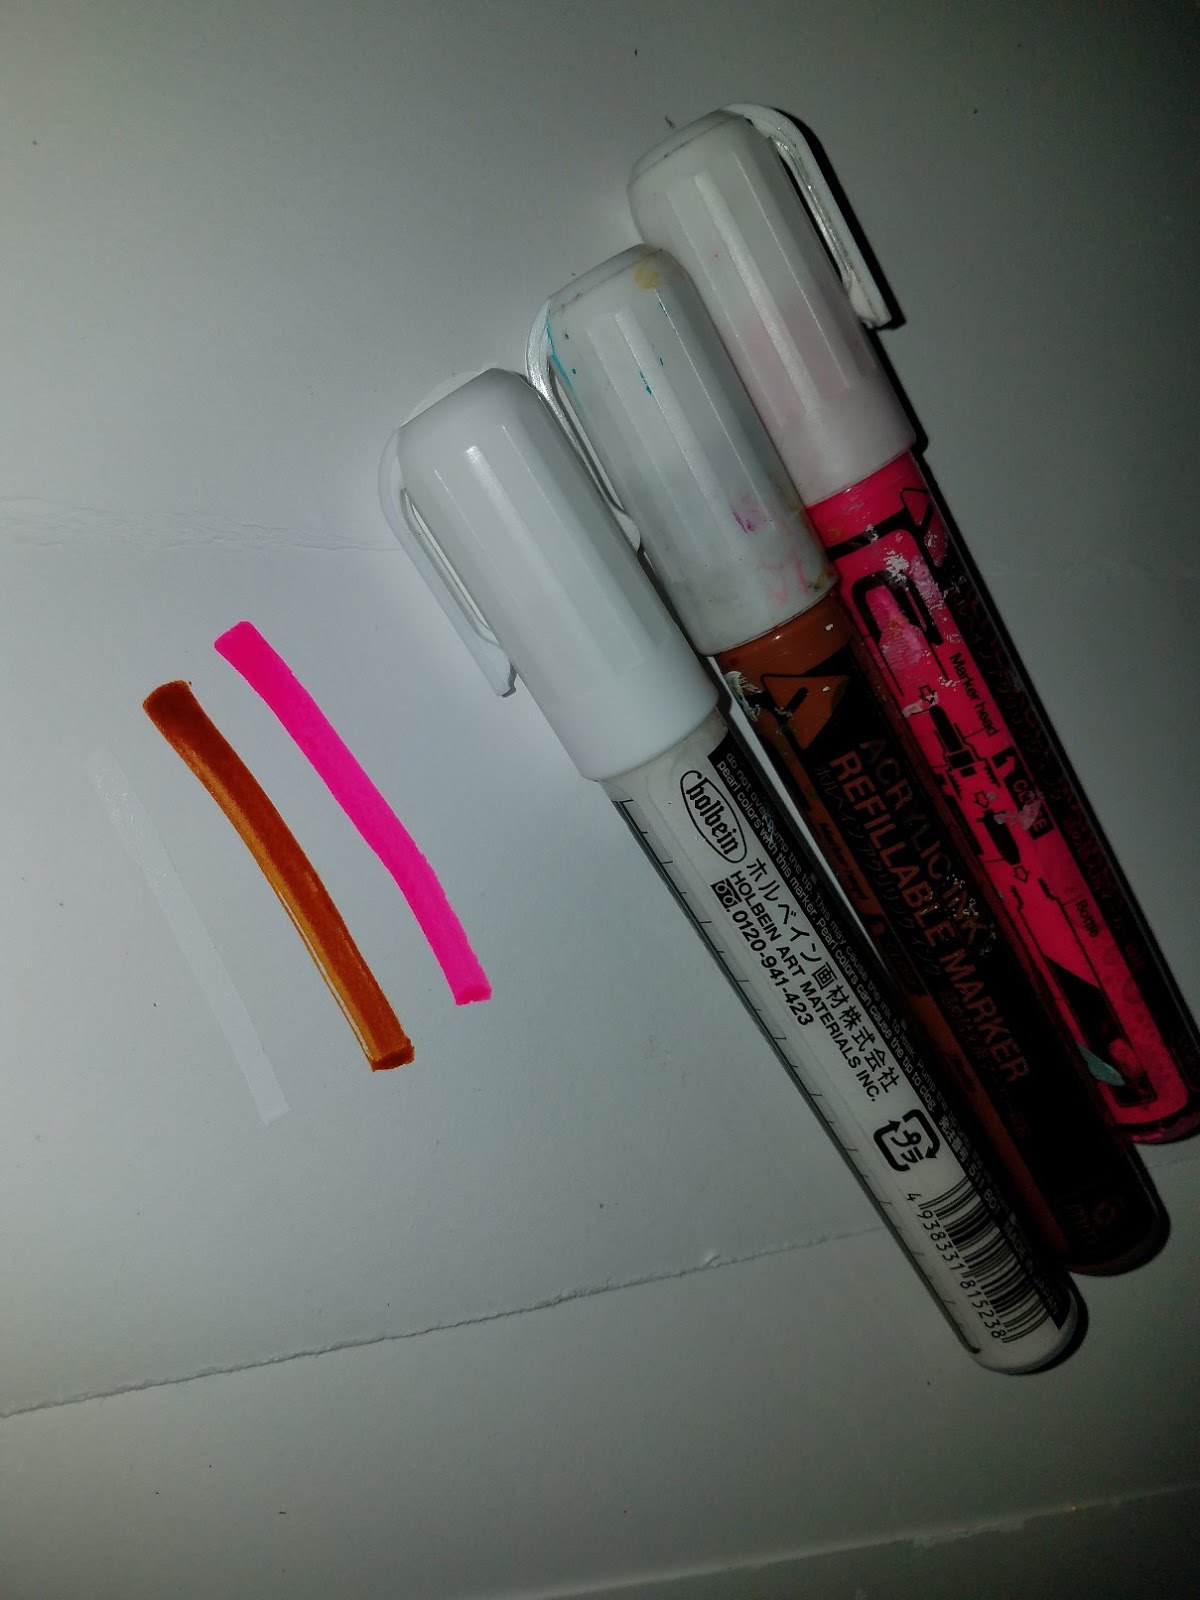 Fluorescent Pink Posca Chalk Paint Marker - for marking your dents